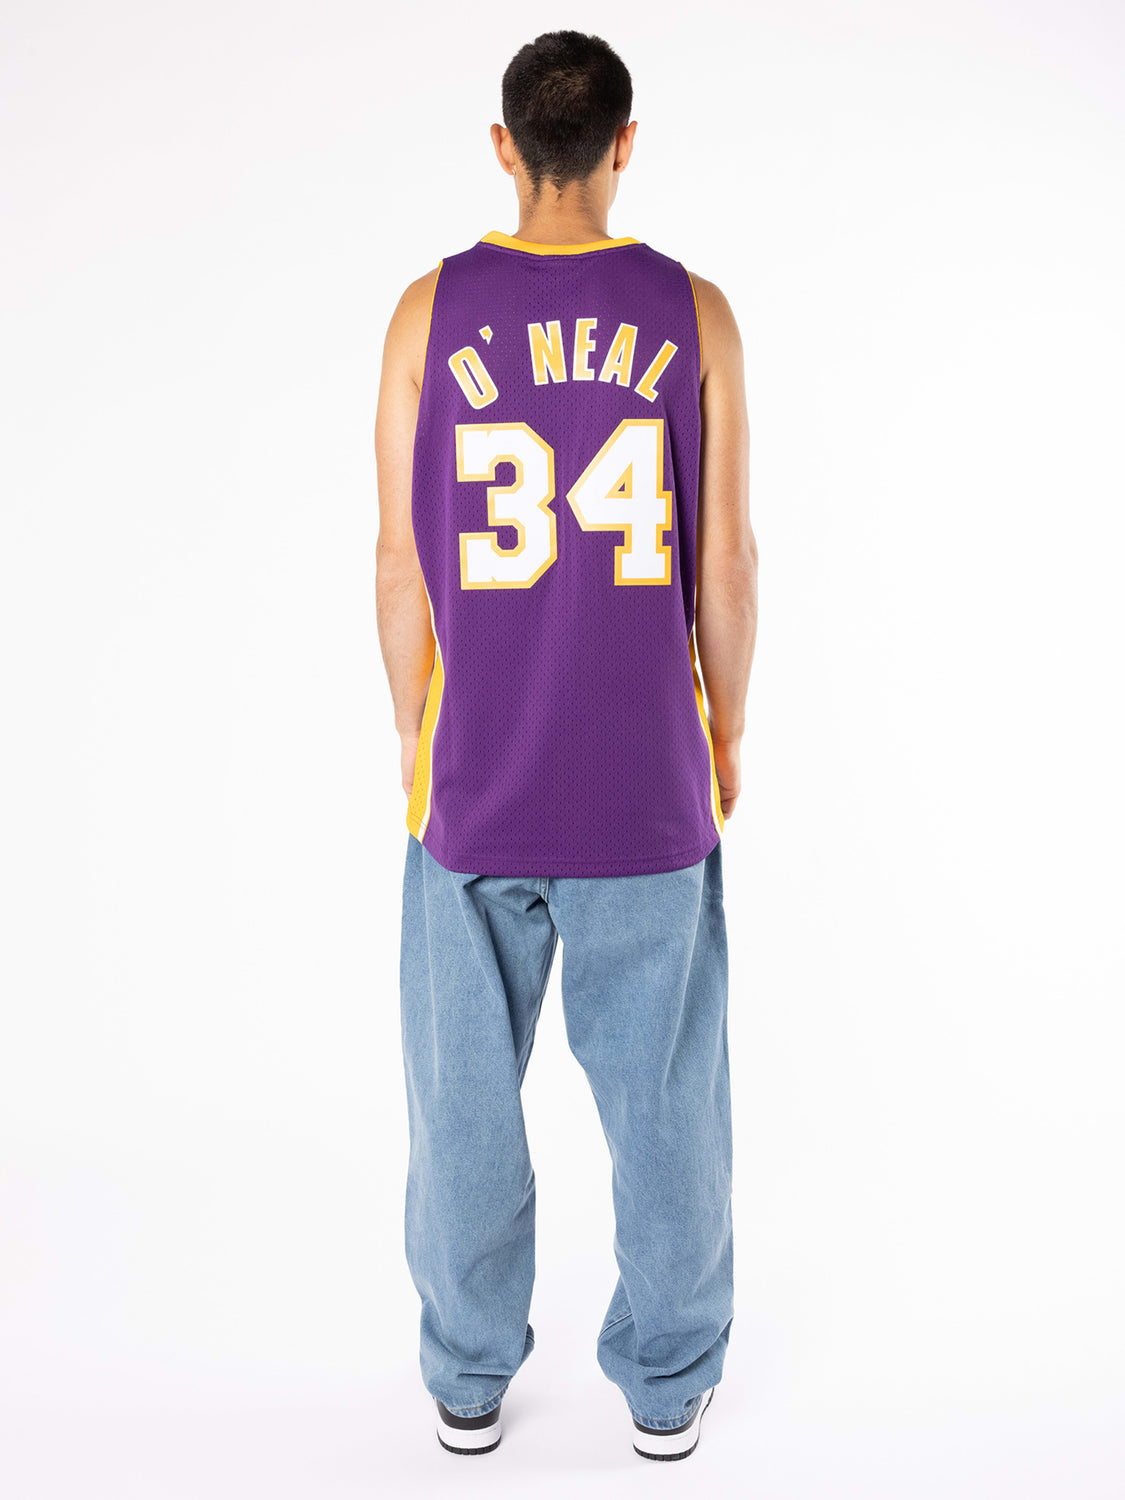 Mitchell & Ness Swingman Jersey Los Angeles Lakers 1999-00 Shaquille O'Neal